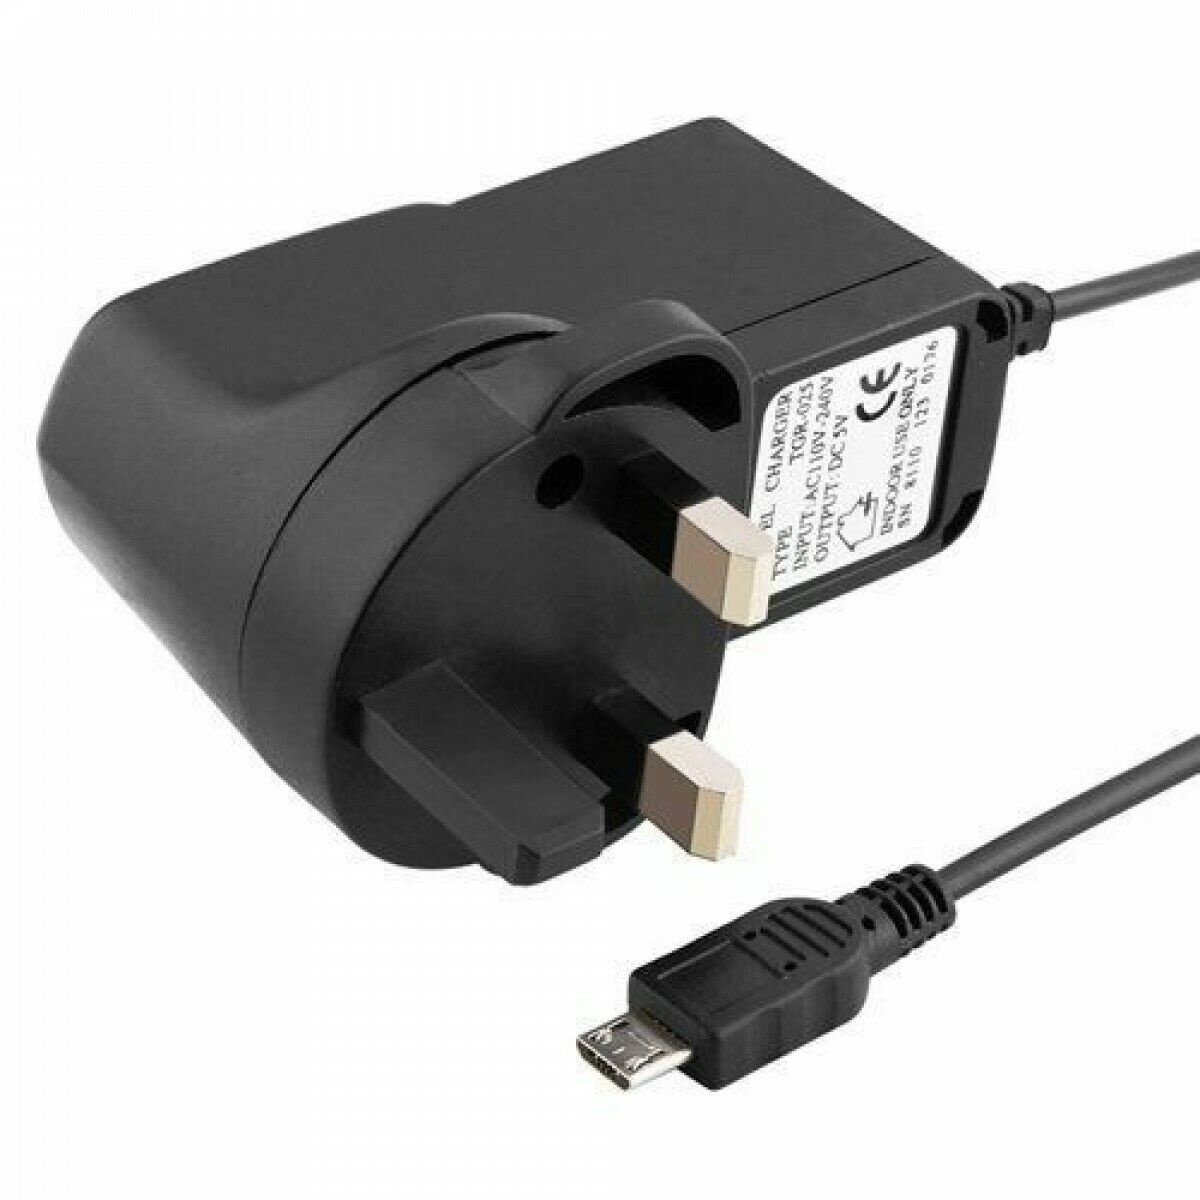 USB Power Cable for Amazon Fire TV Stick 1.5m Lead Charging Adapter Wire Charger